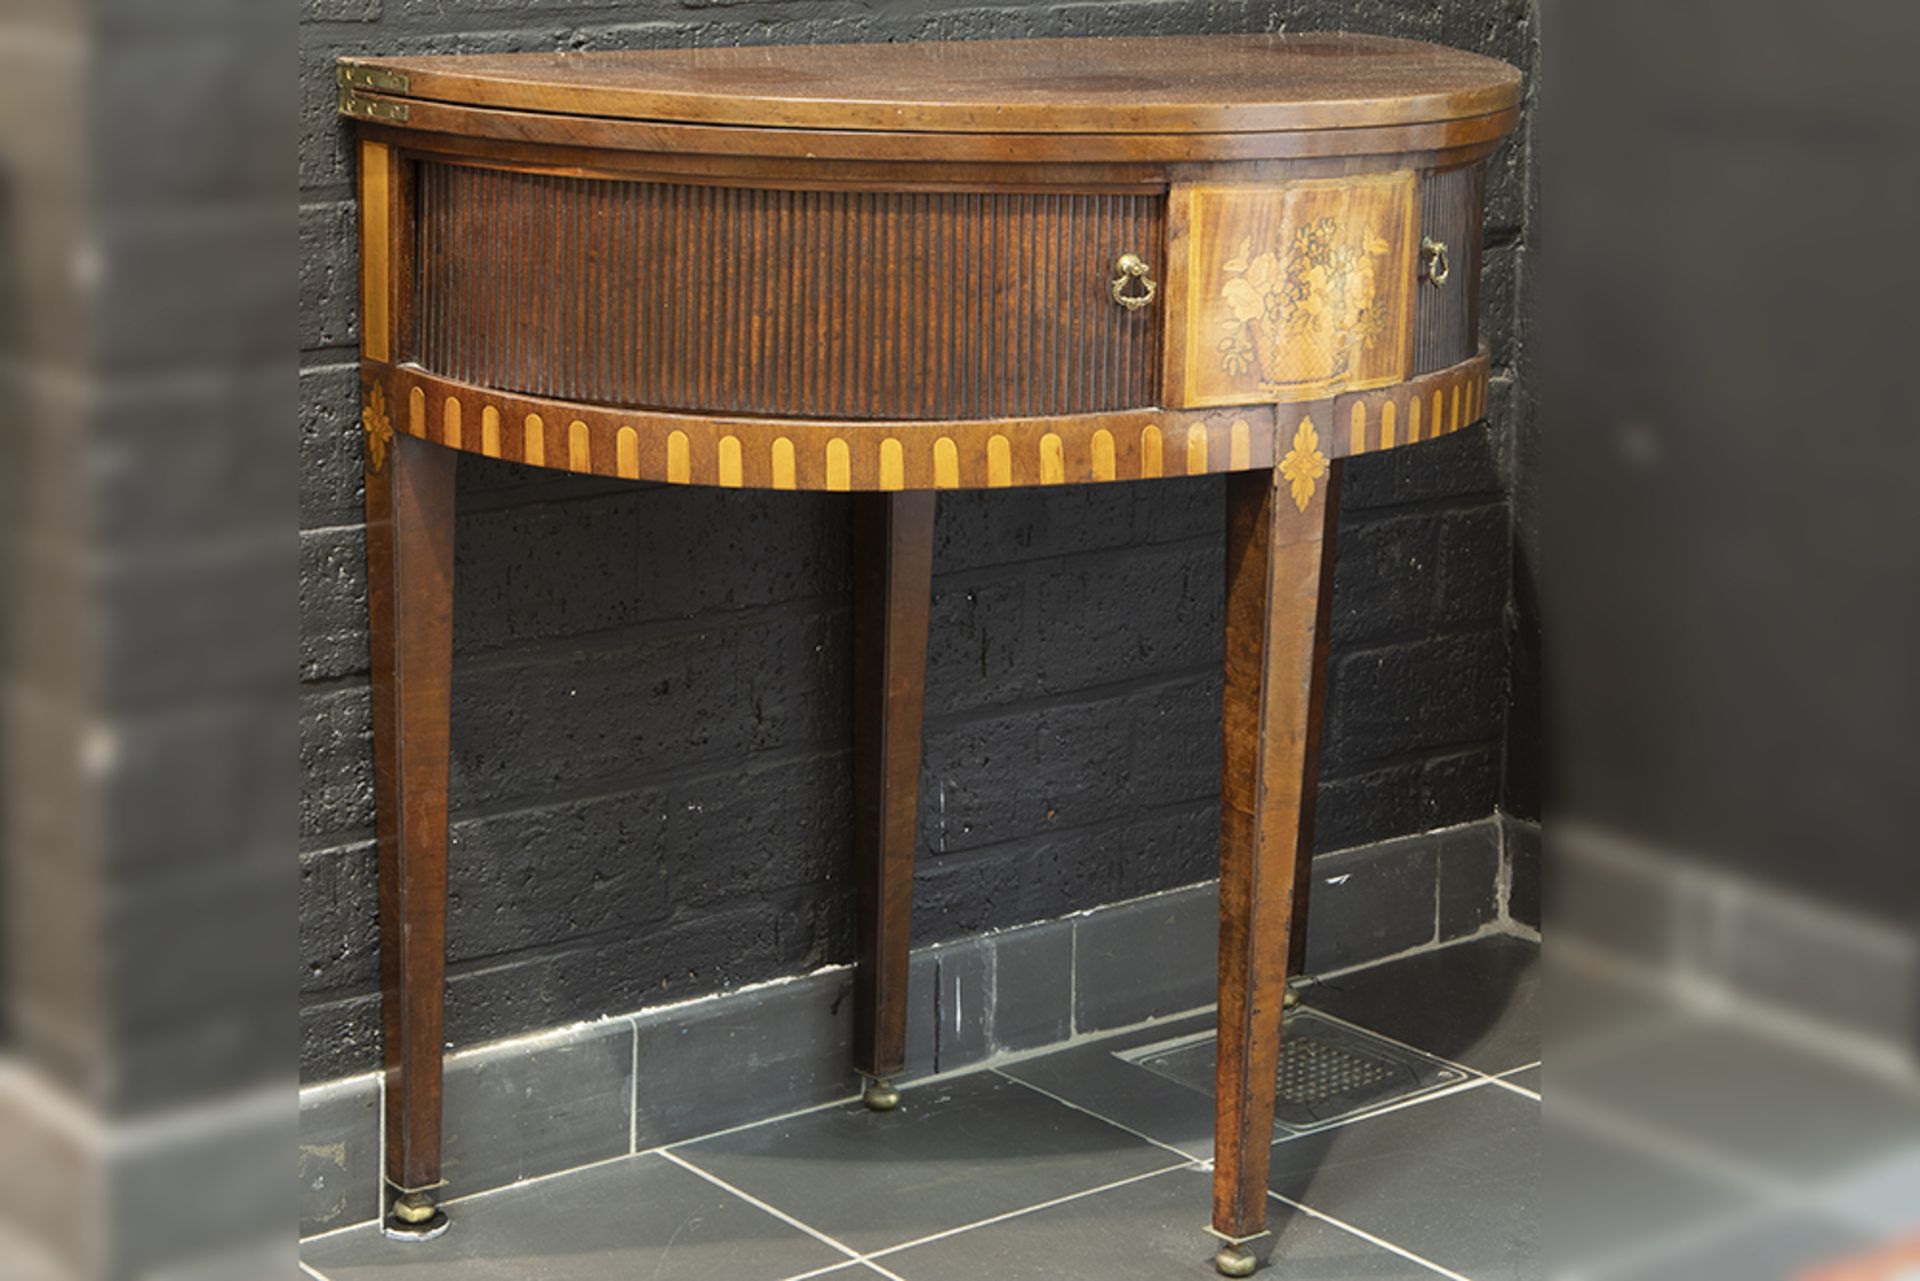 18th Cent. neoclassical side cabinet (convertible into a round table) in mahogany with inlay ||